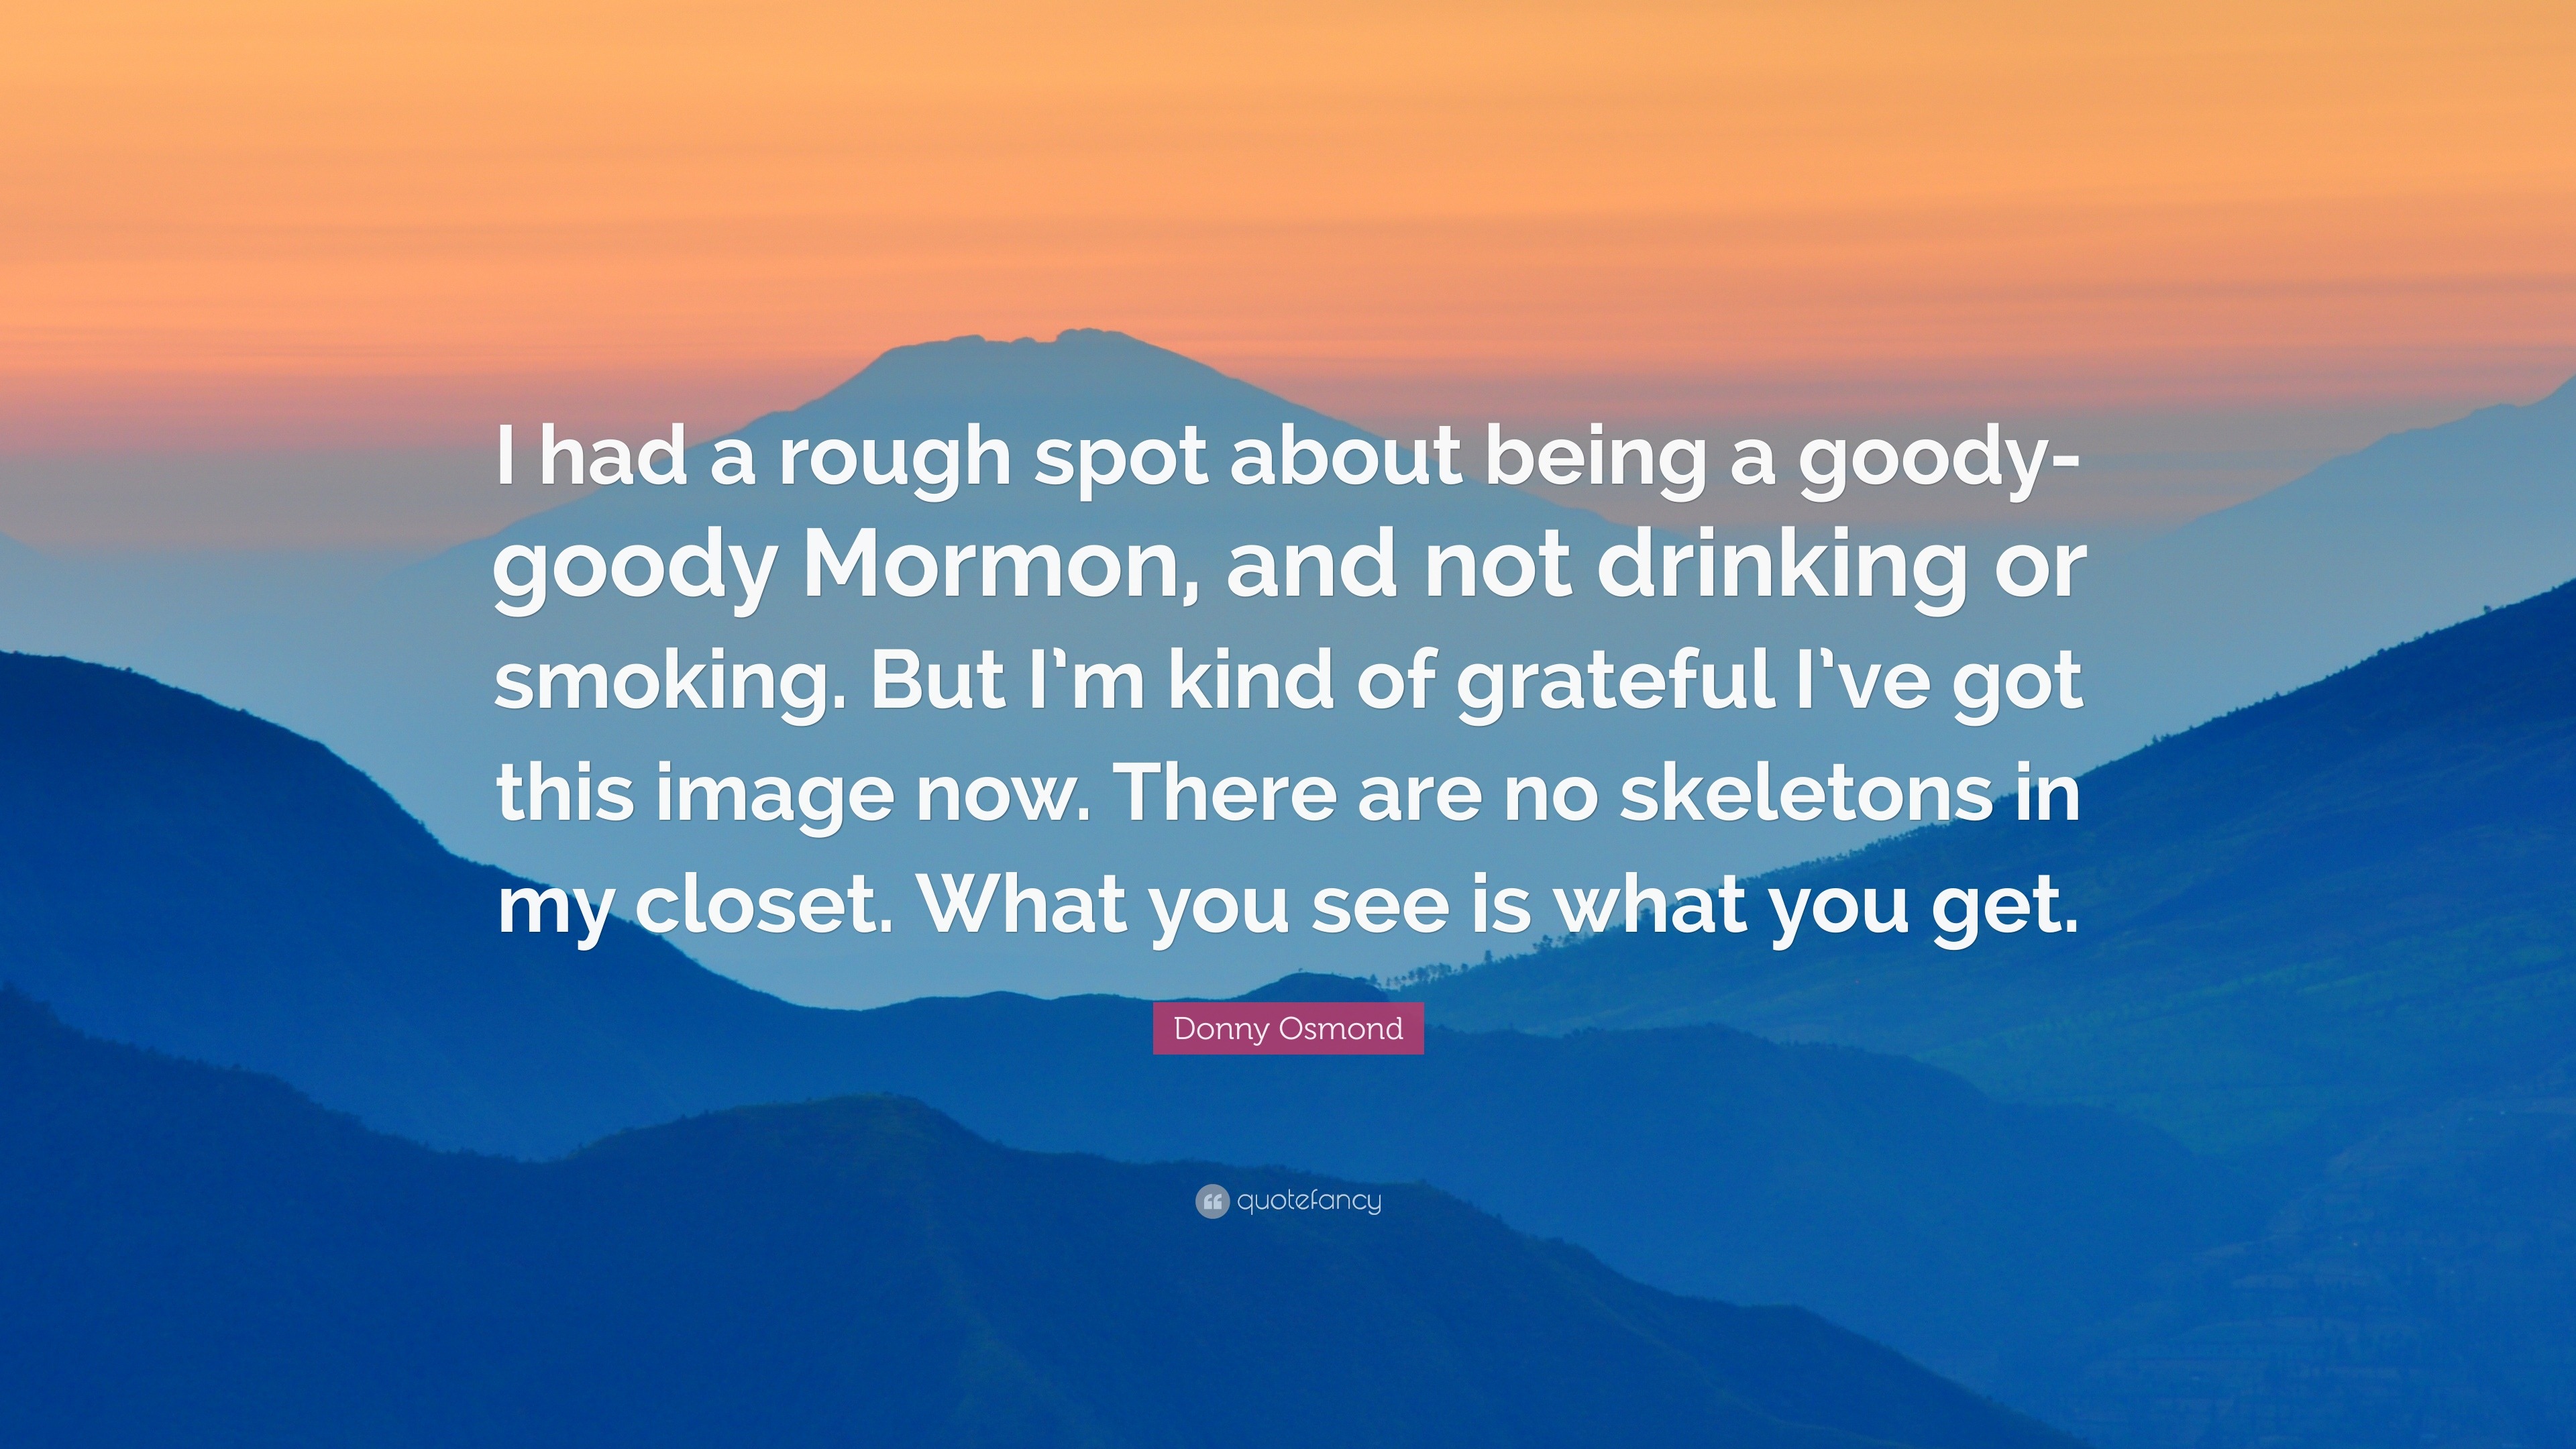 Donny Osmond Quote: “I had a rough spot about being a goody-goody Mormon,  and not drinking or smoking. But I'm kind of grateful I've got this...”